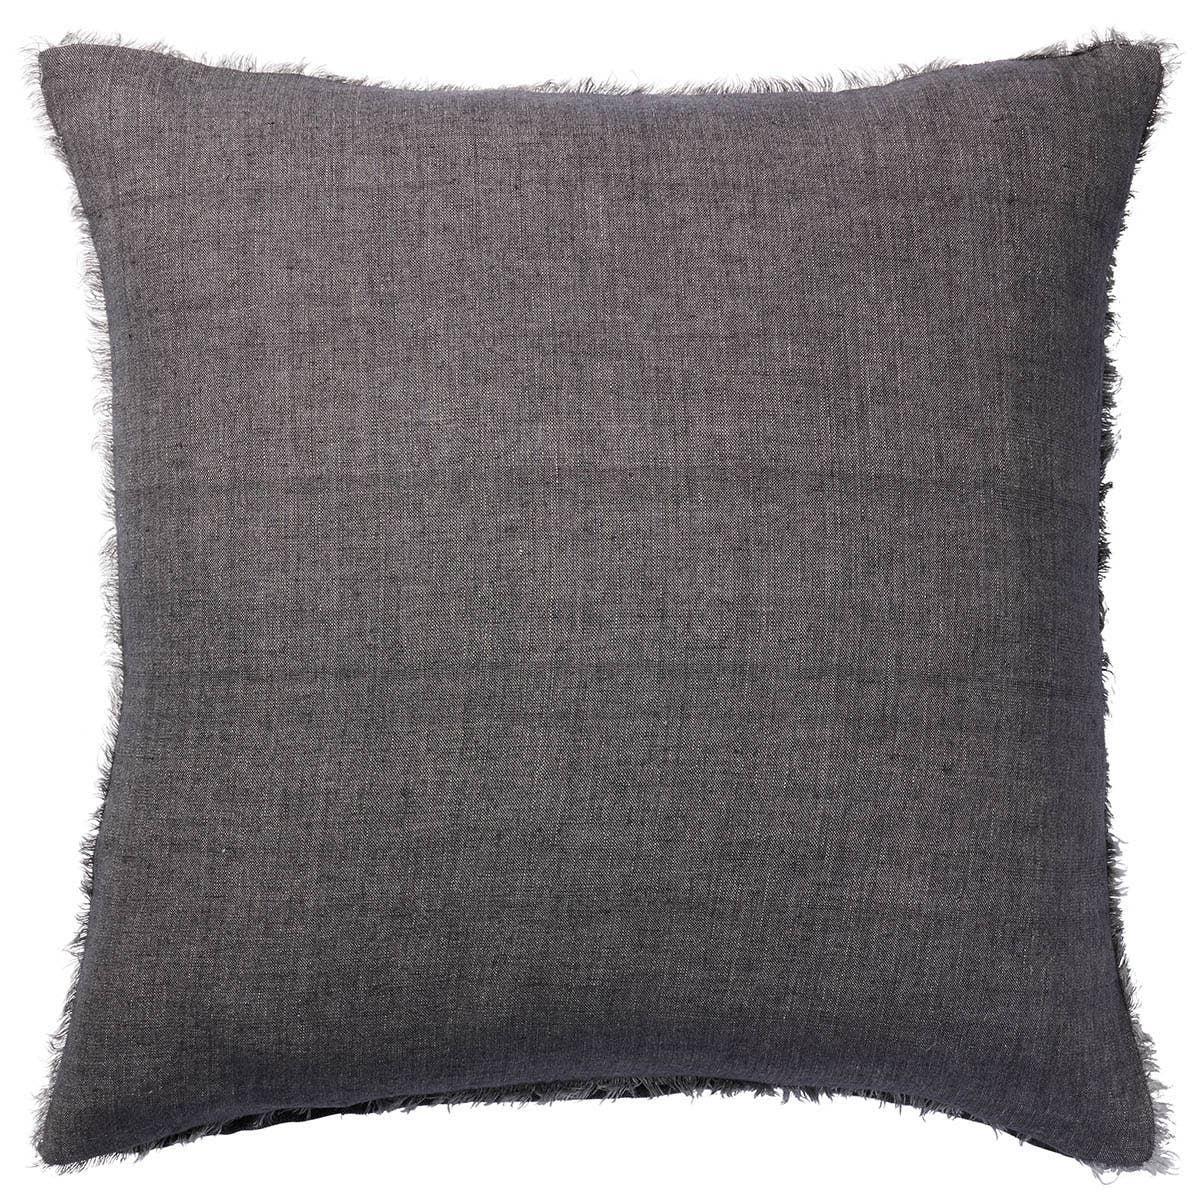 Linen is a fiber that takes on a soft beauty the more it is washed and worn ? its beauty is shaped by daily life. The handmade Cassis pillow features a soft charcoal color and a natural fringe on all sides. The gentle texture brings subtle sophistication to any contemporary home.Indoor Pillow Amethyst Home provides interior design, new home construction design consulting, vintage area rugs, and lighting in the Winter Garden metro area.